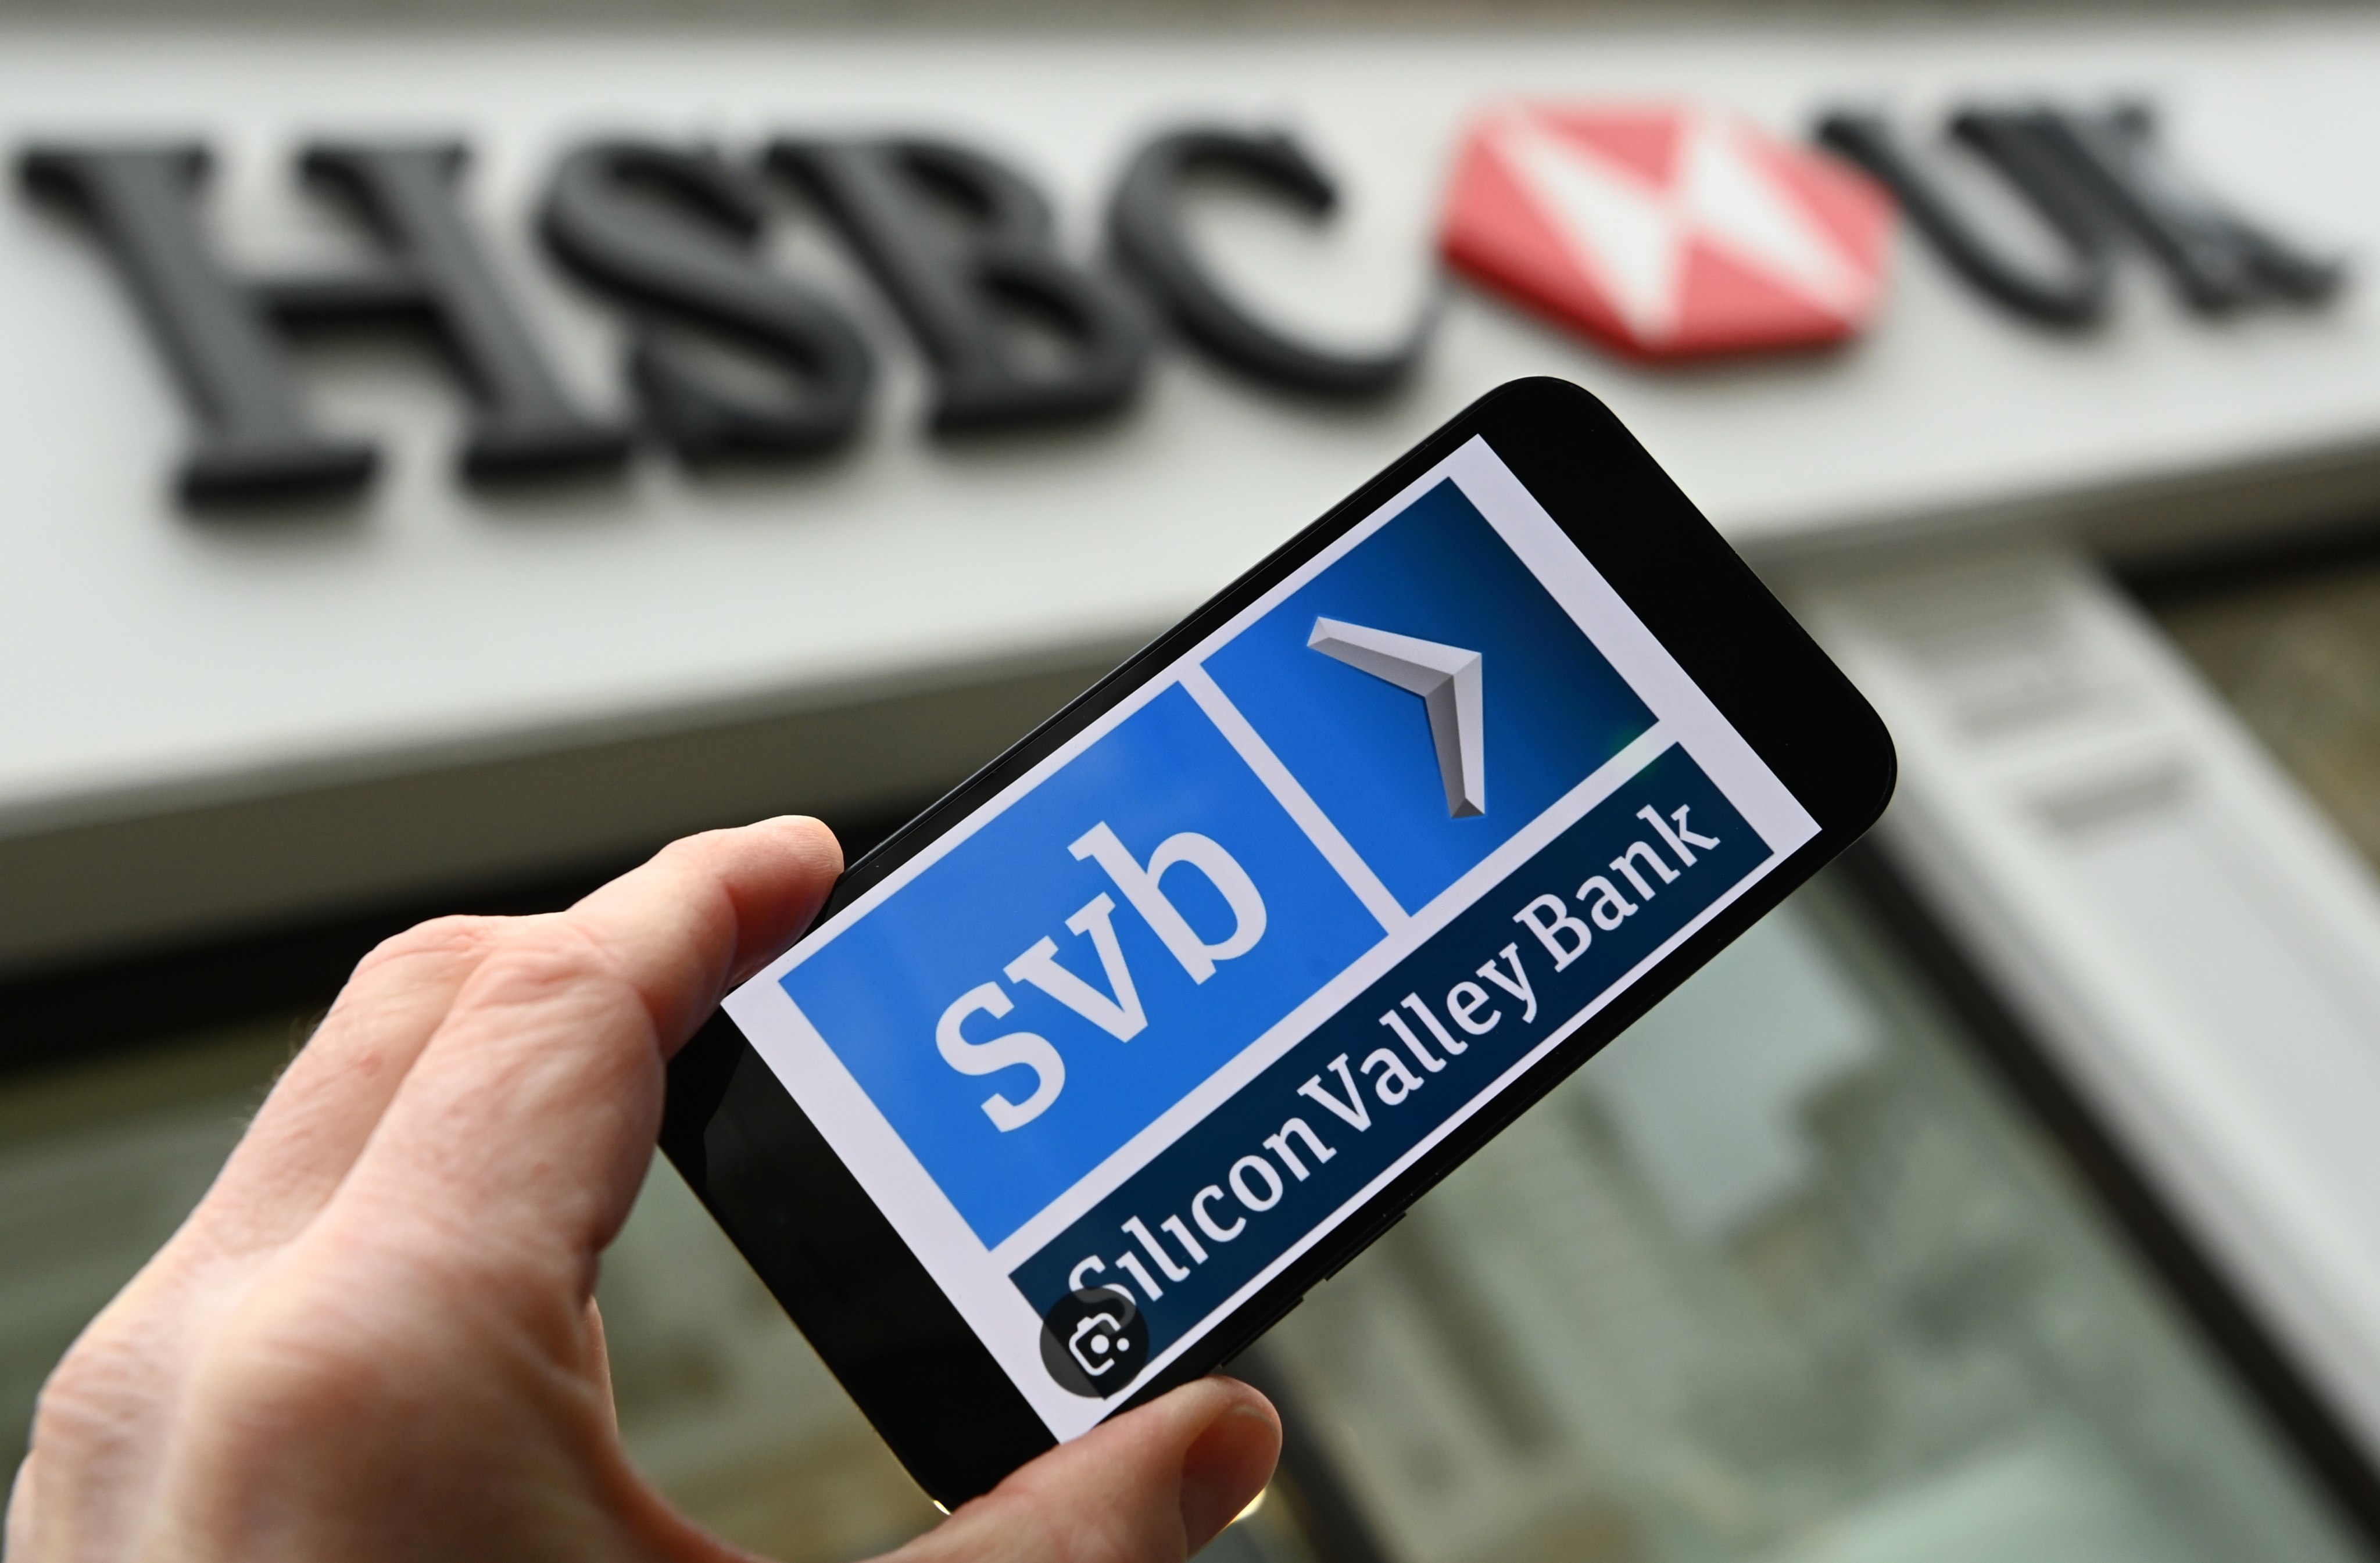 HSBC Holdings, which bought SVB for £1, has used the acquisition to raise its tech profile and its wealth management business. Photo: EPA-EFE